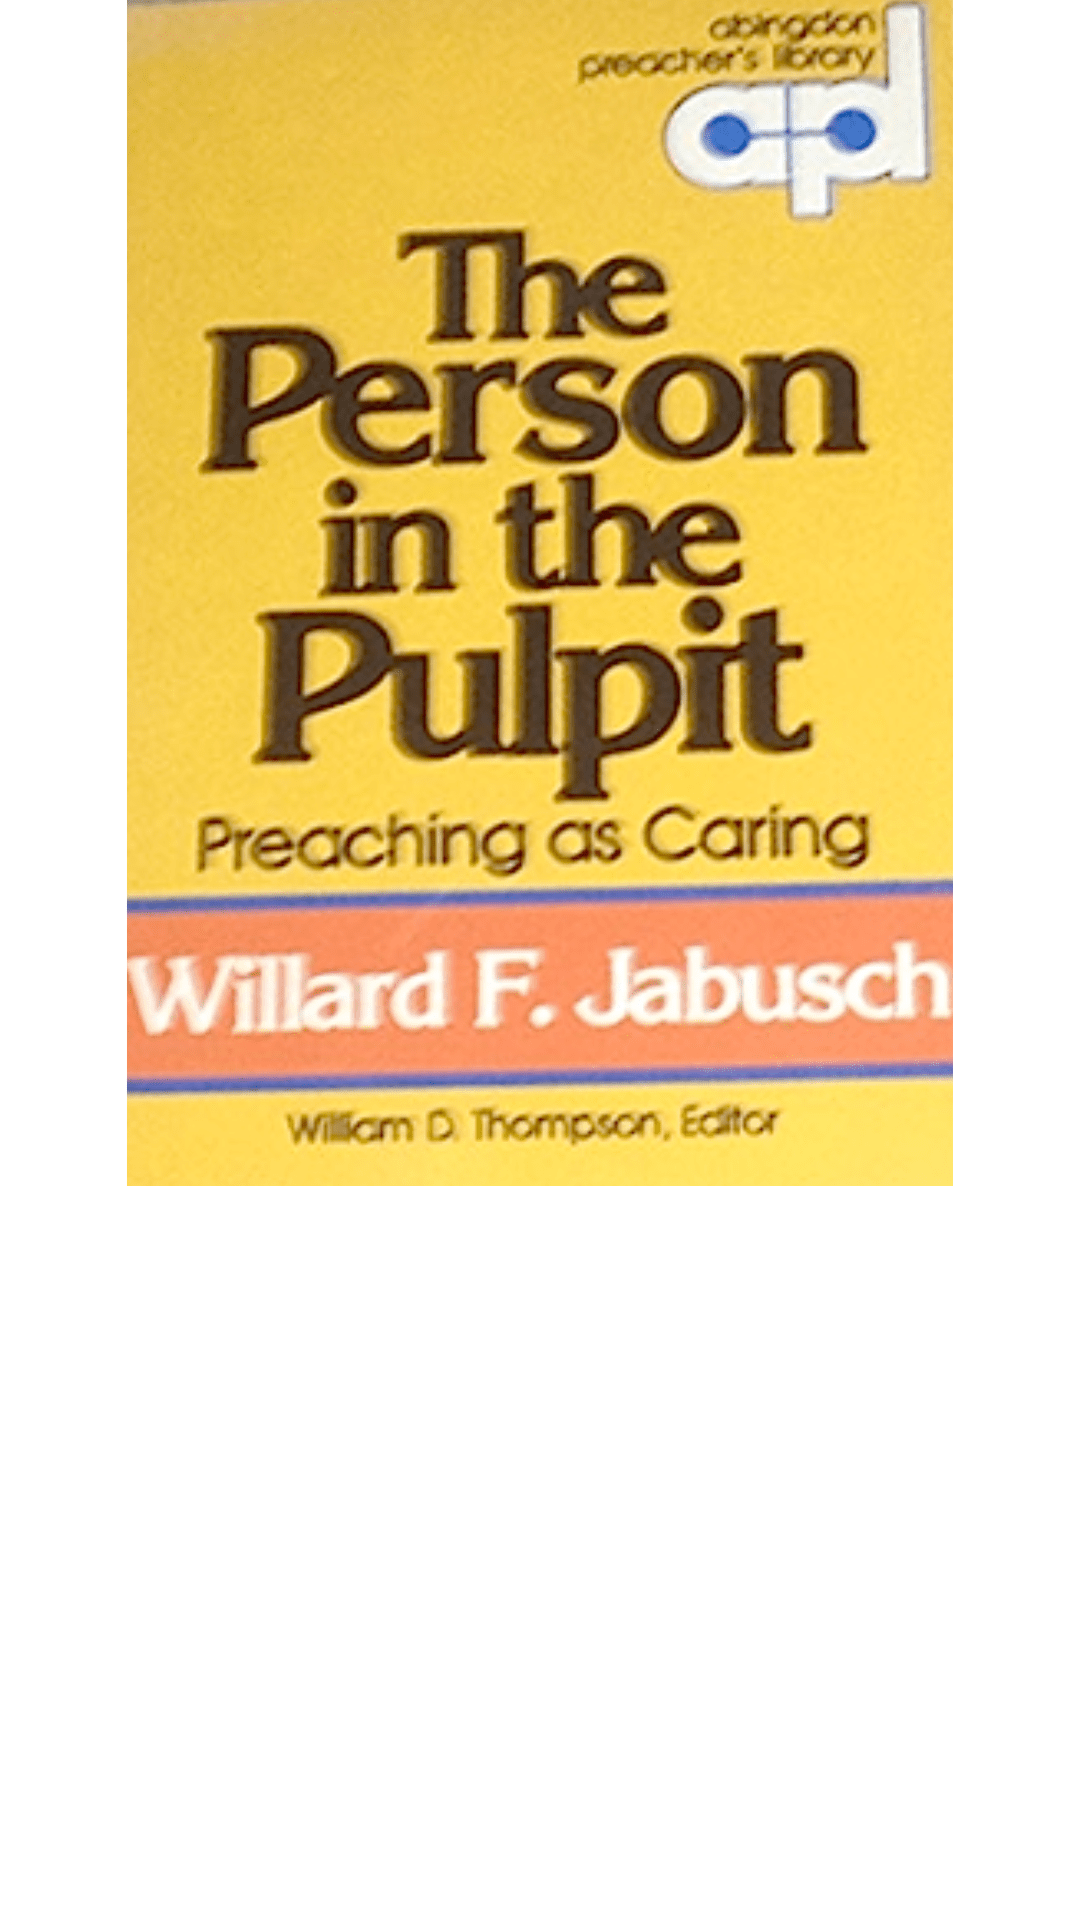 The Person in the Pulpit: Preaching As Caring